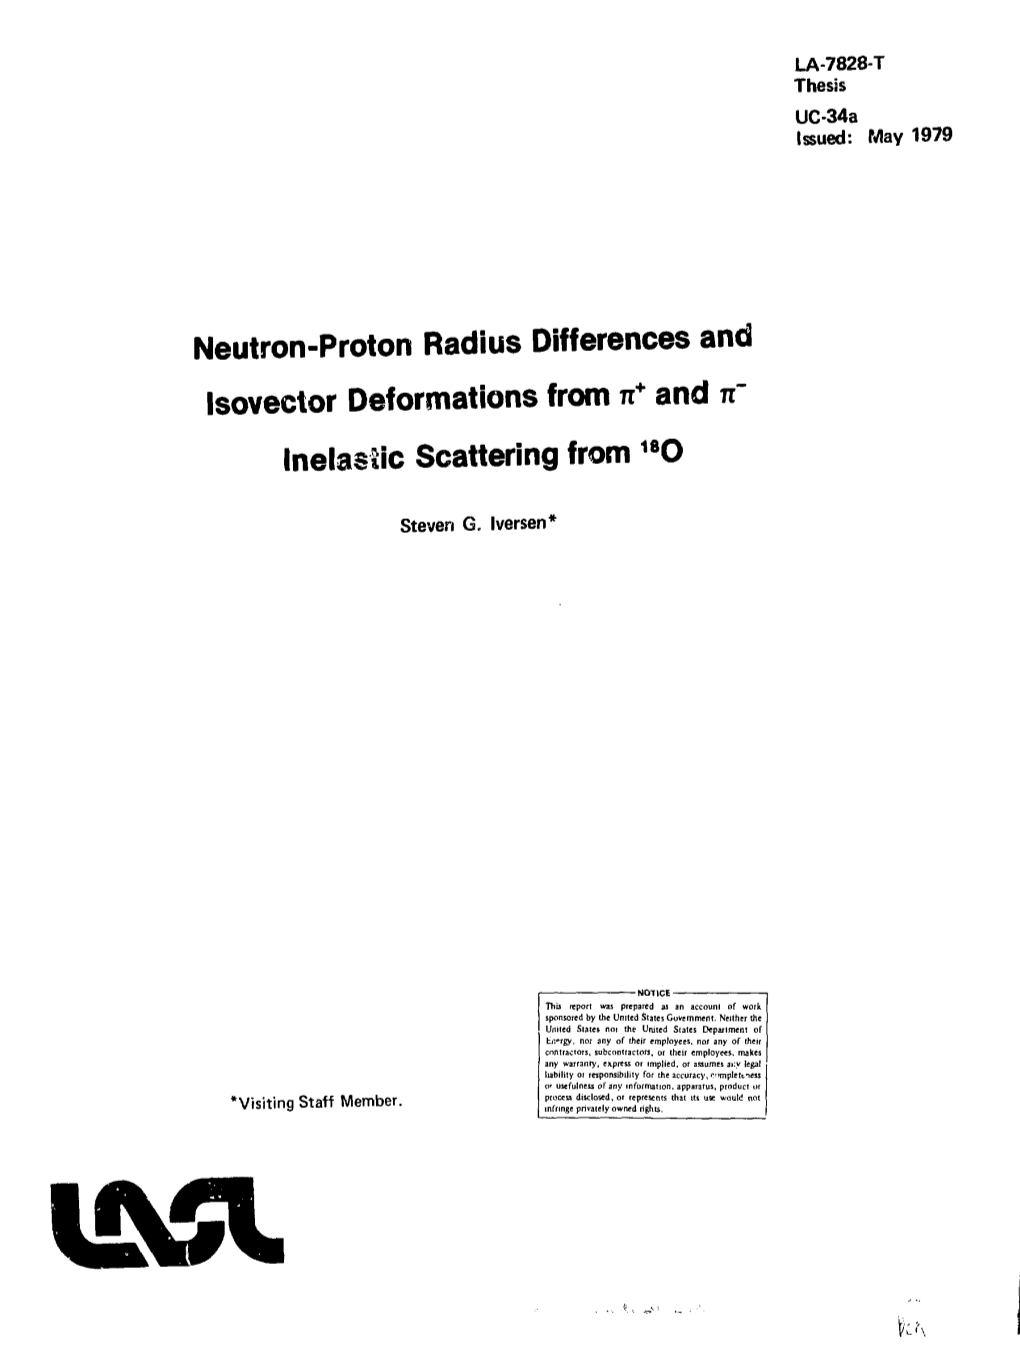 Neutron-Proton Radius Differences and Isovector Deformations from N+ and Ir Inelasiic Scattering from 18O